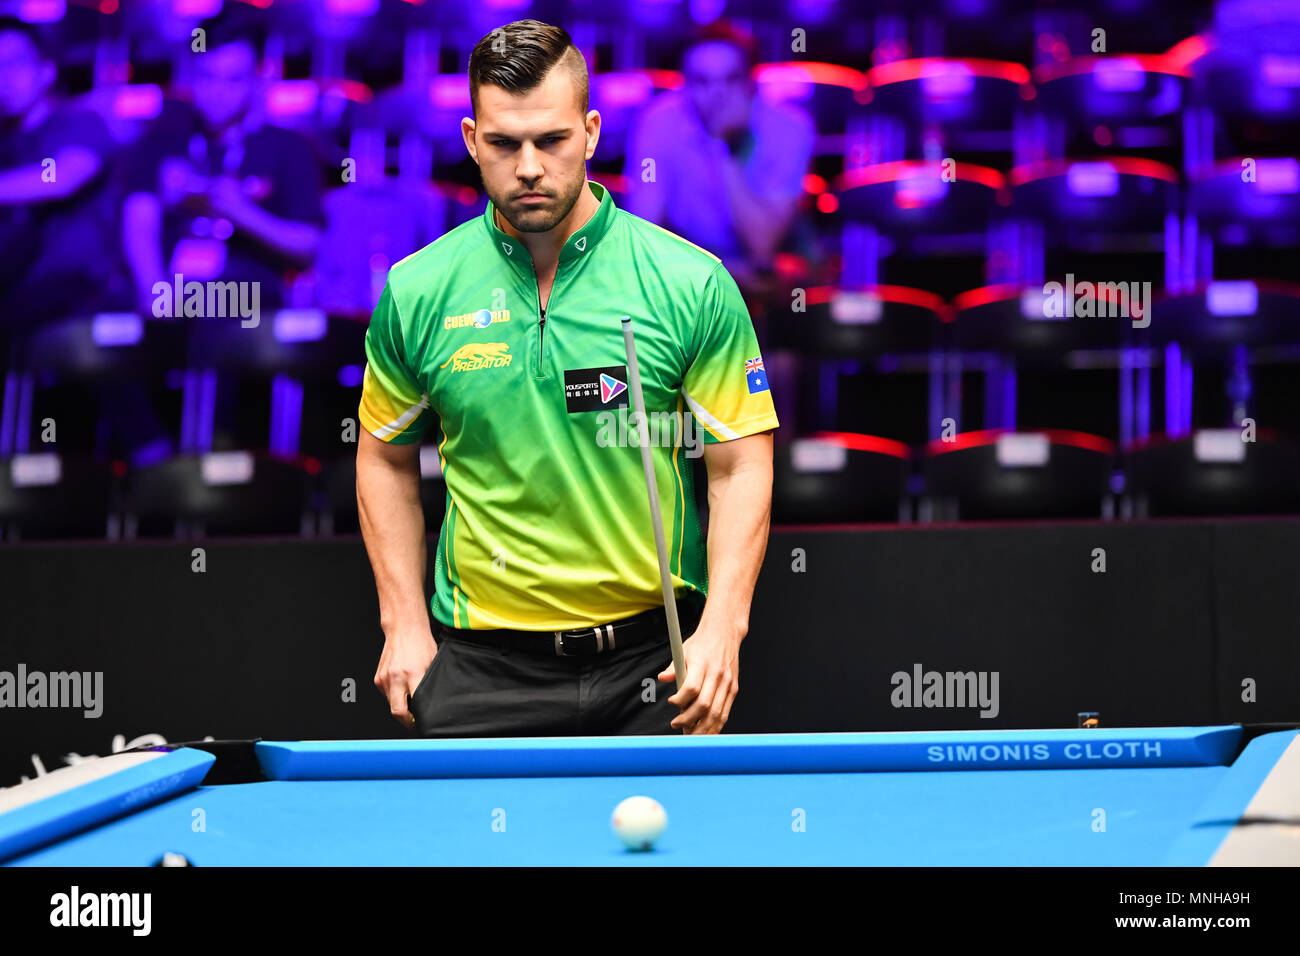 Australias Justin Sajich in action during WORLD CUP of POOL 2018 Round 1 - Australia vs Russia at Luwan (Gymnasium) Arena on Thursday, 17 May 2018